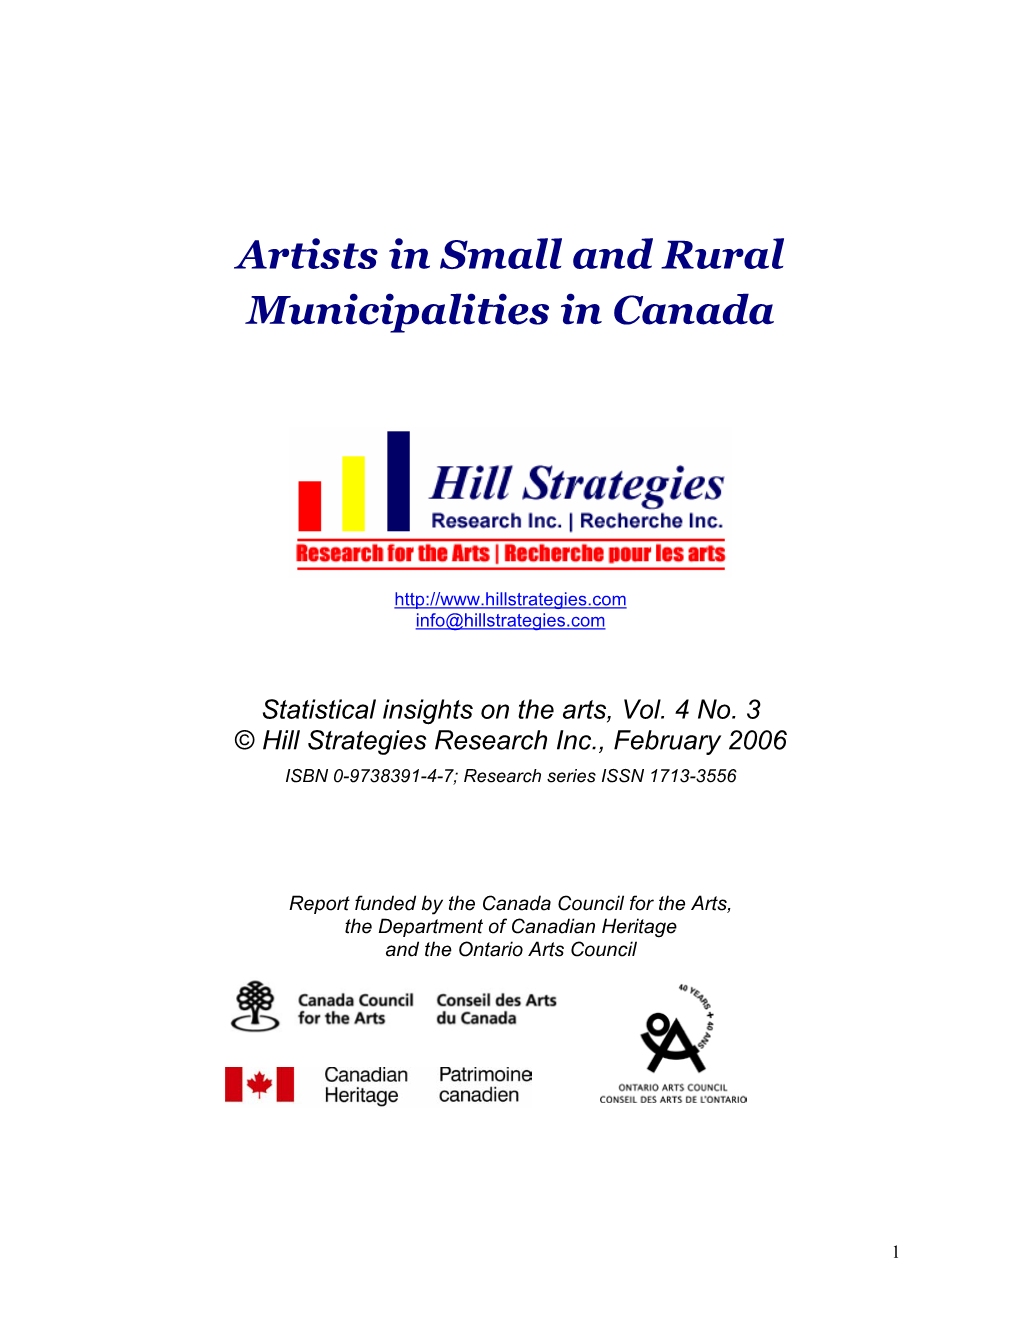 Artists in Small and Rural Municipalities in Canada